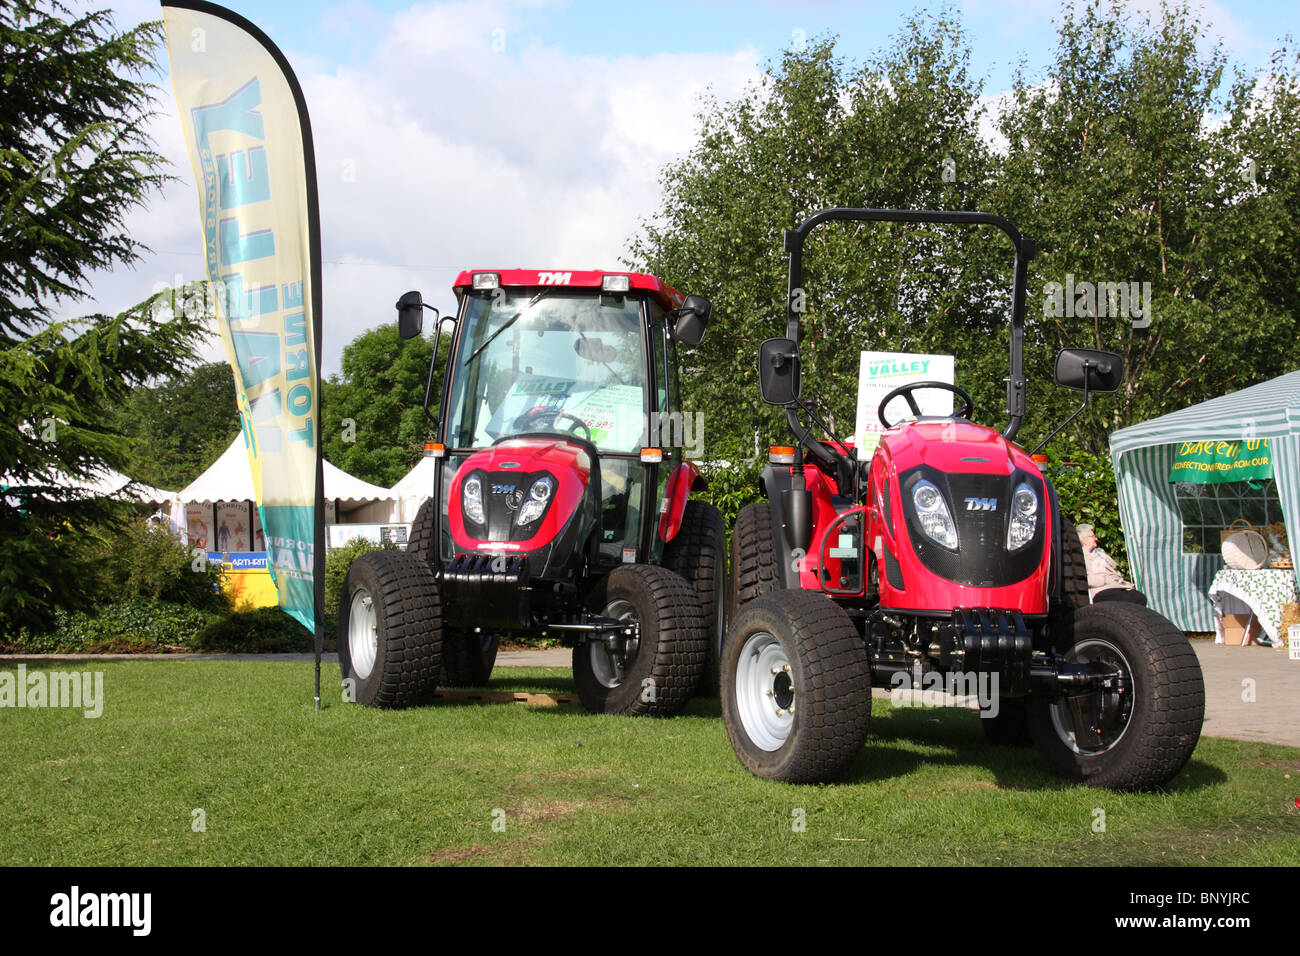 Tractors for sale at the Bakewell Show, Bakewell, Derbyshire, England, U.K. Stock Photo